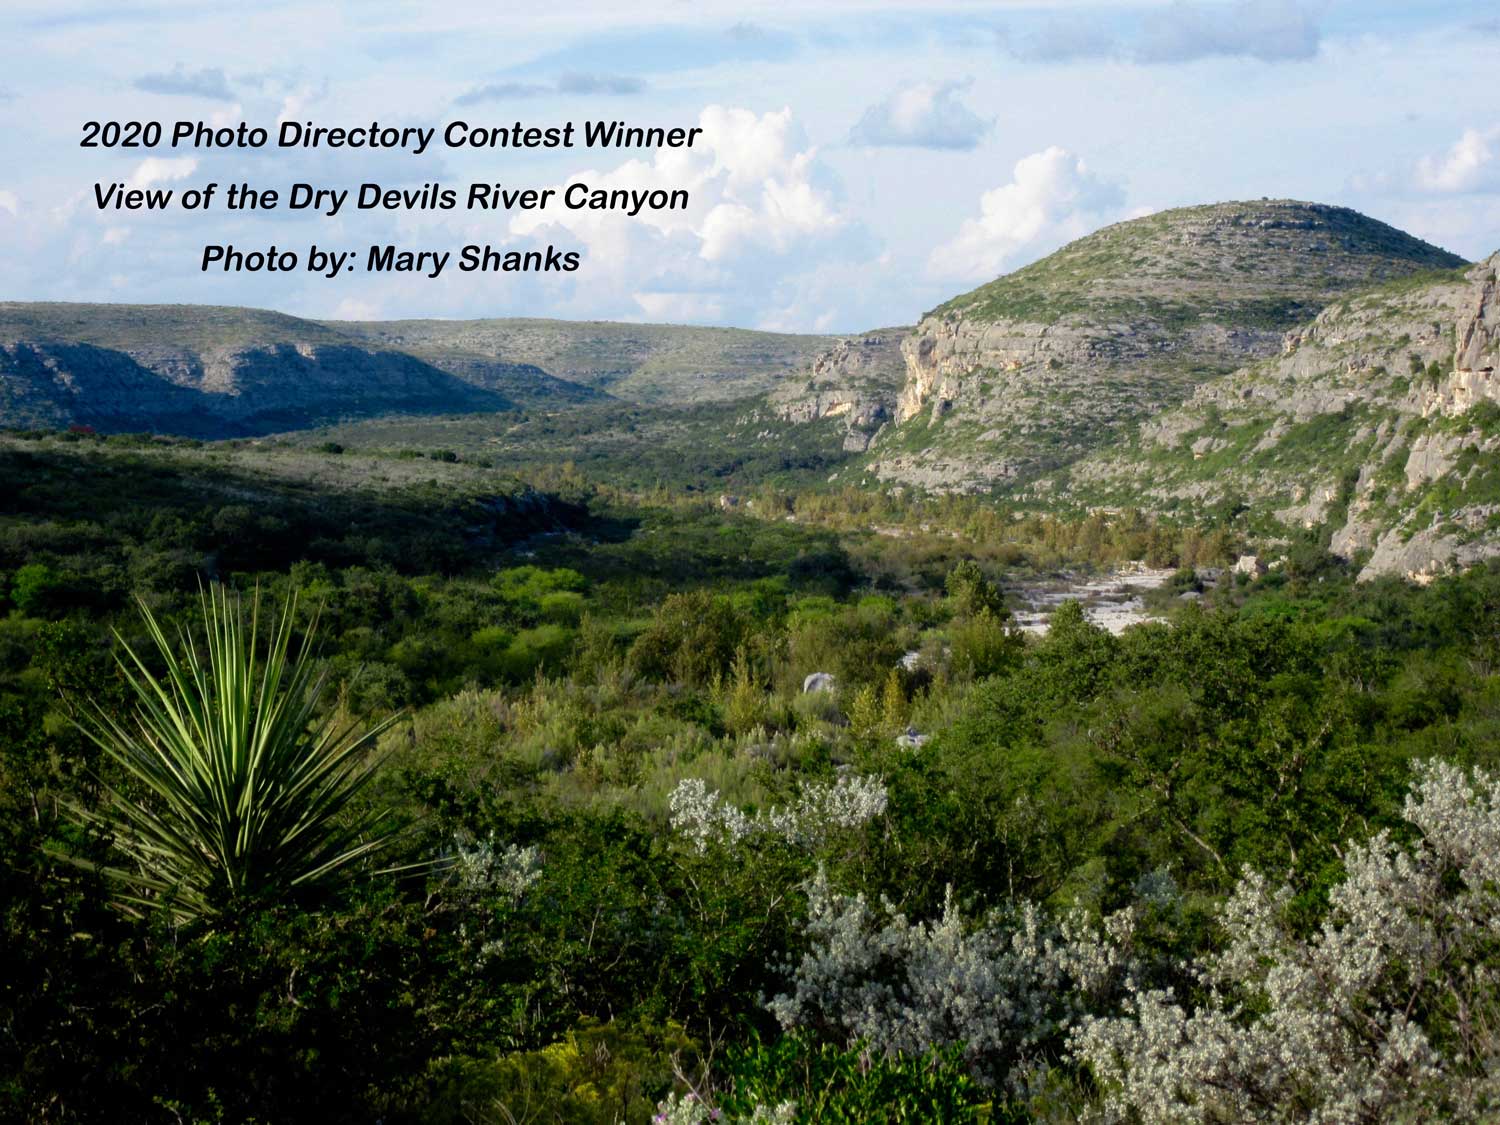 View of the Dry Devils River - 2020 Photo Contest Winner